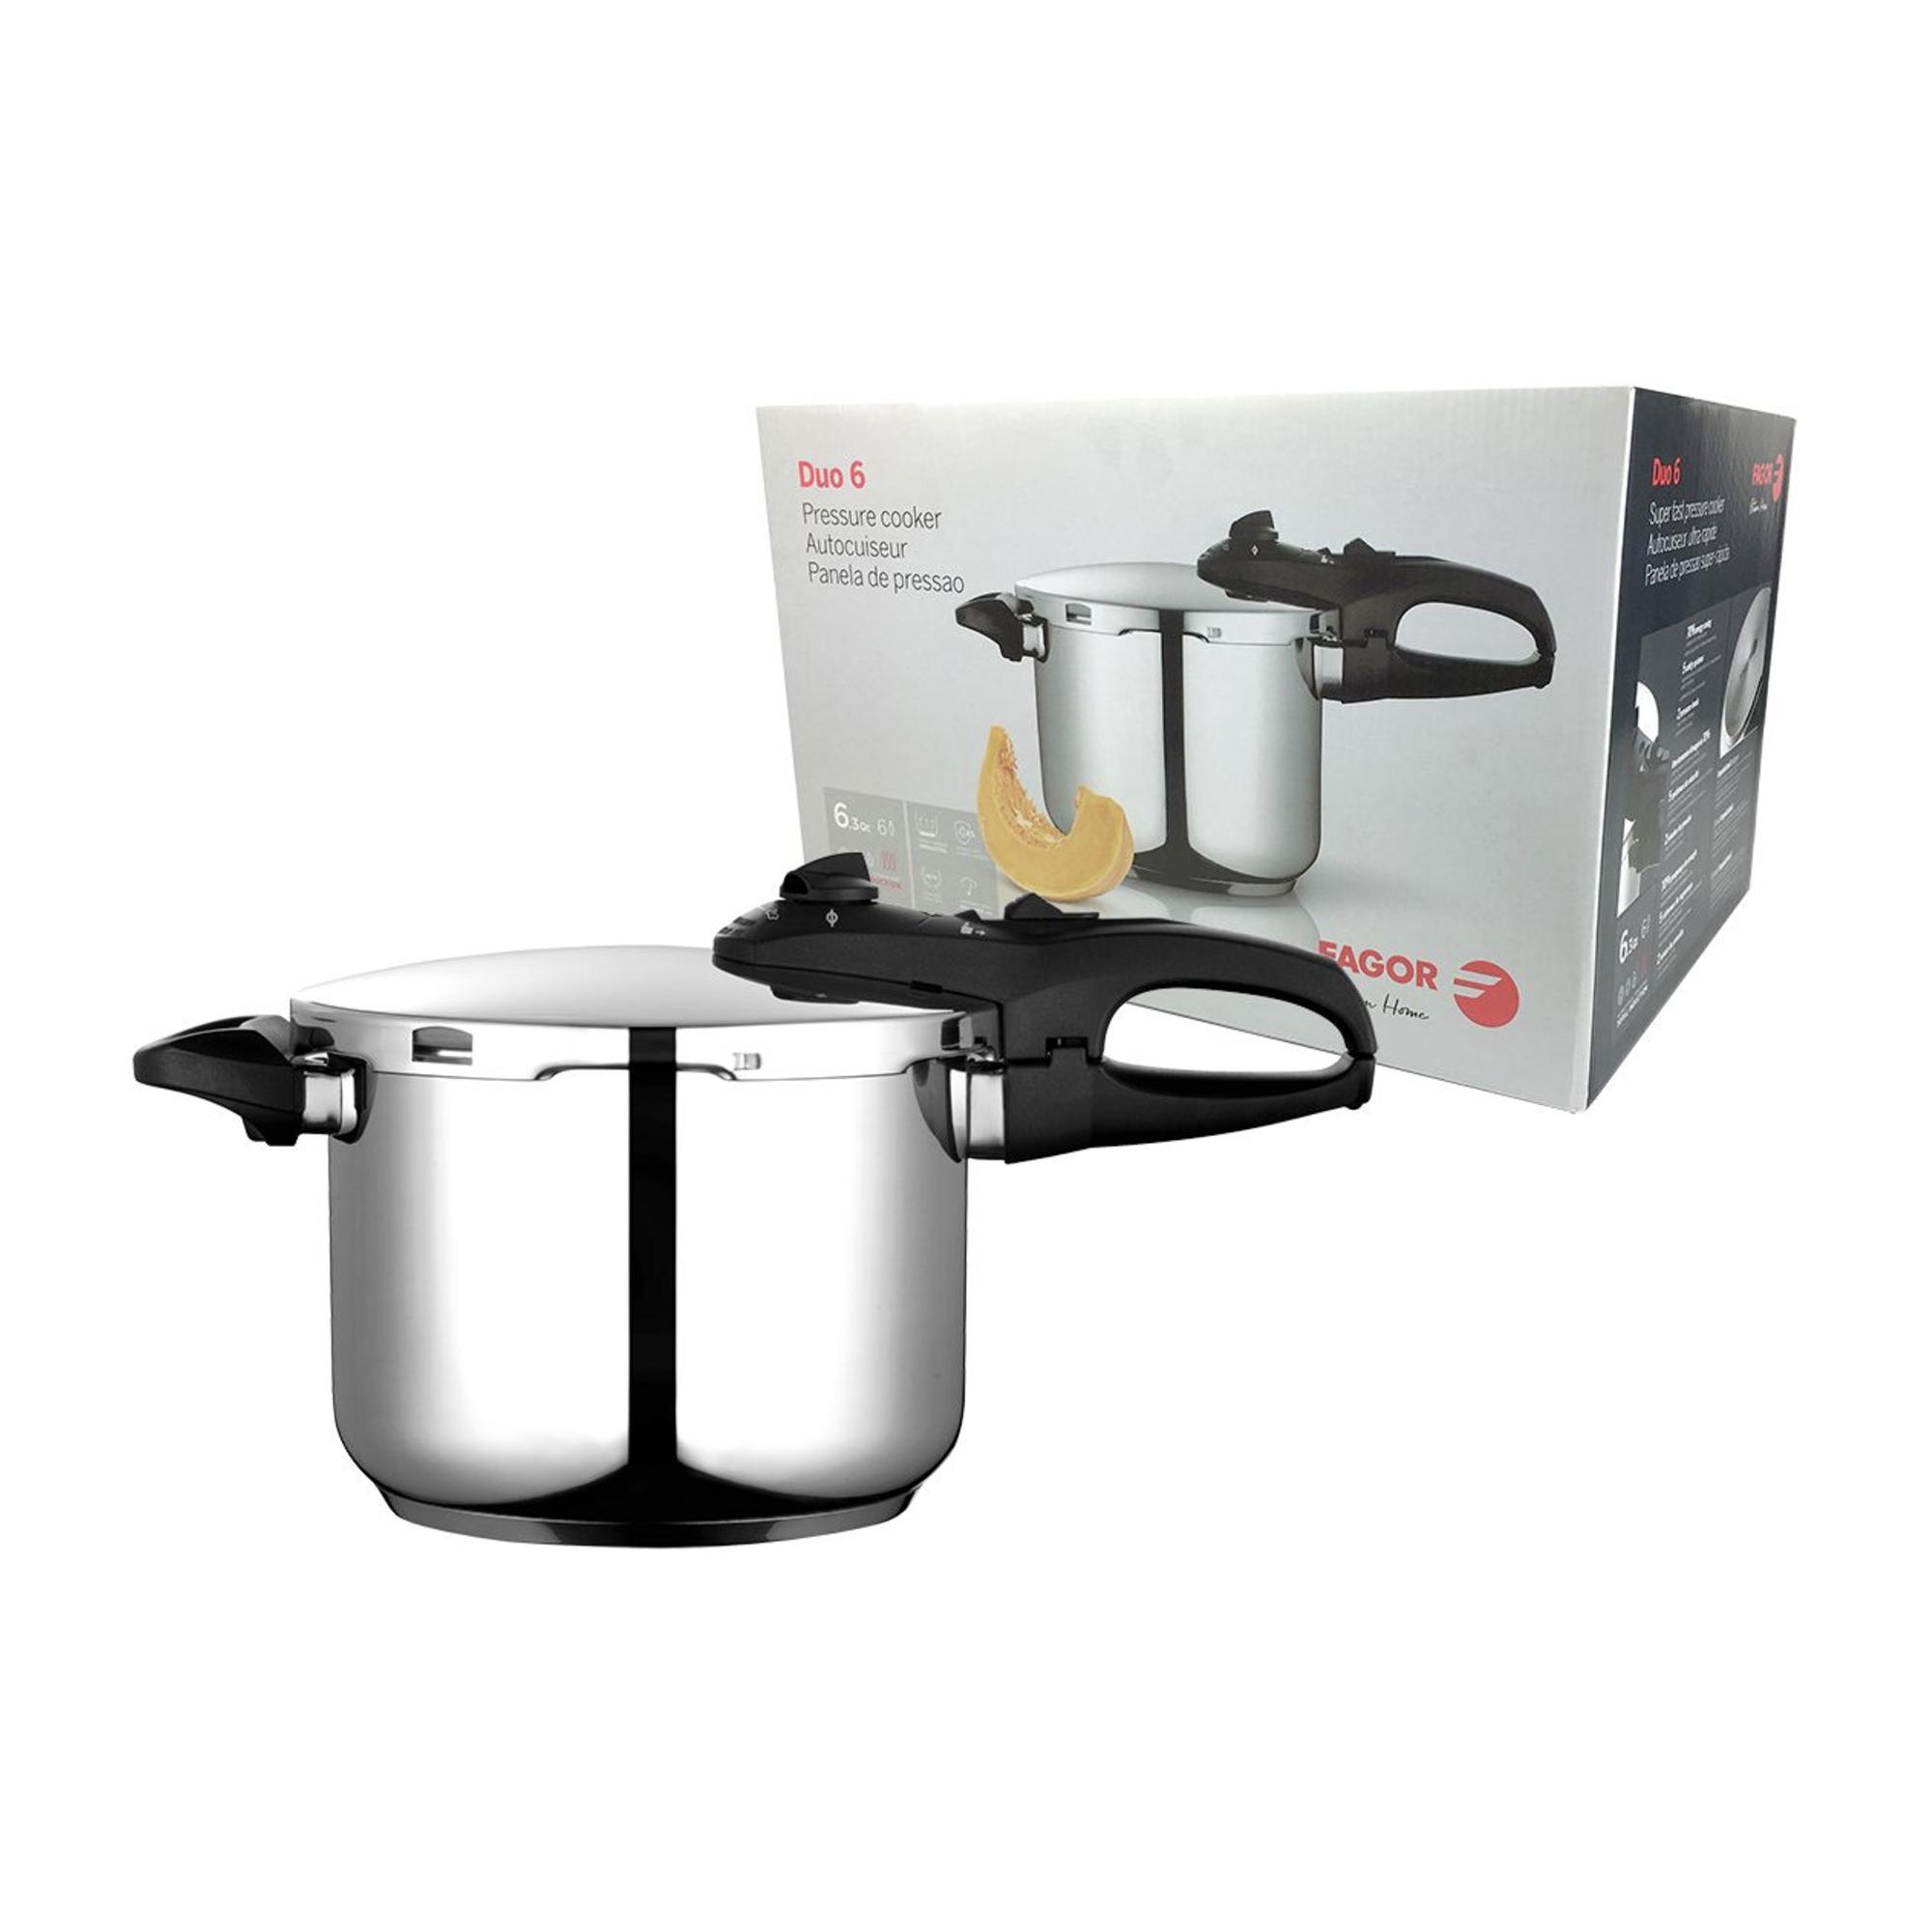 Fagor Duo Stainless Steel Pressure Cooker 6L Image 6